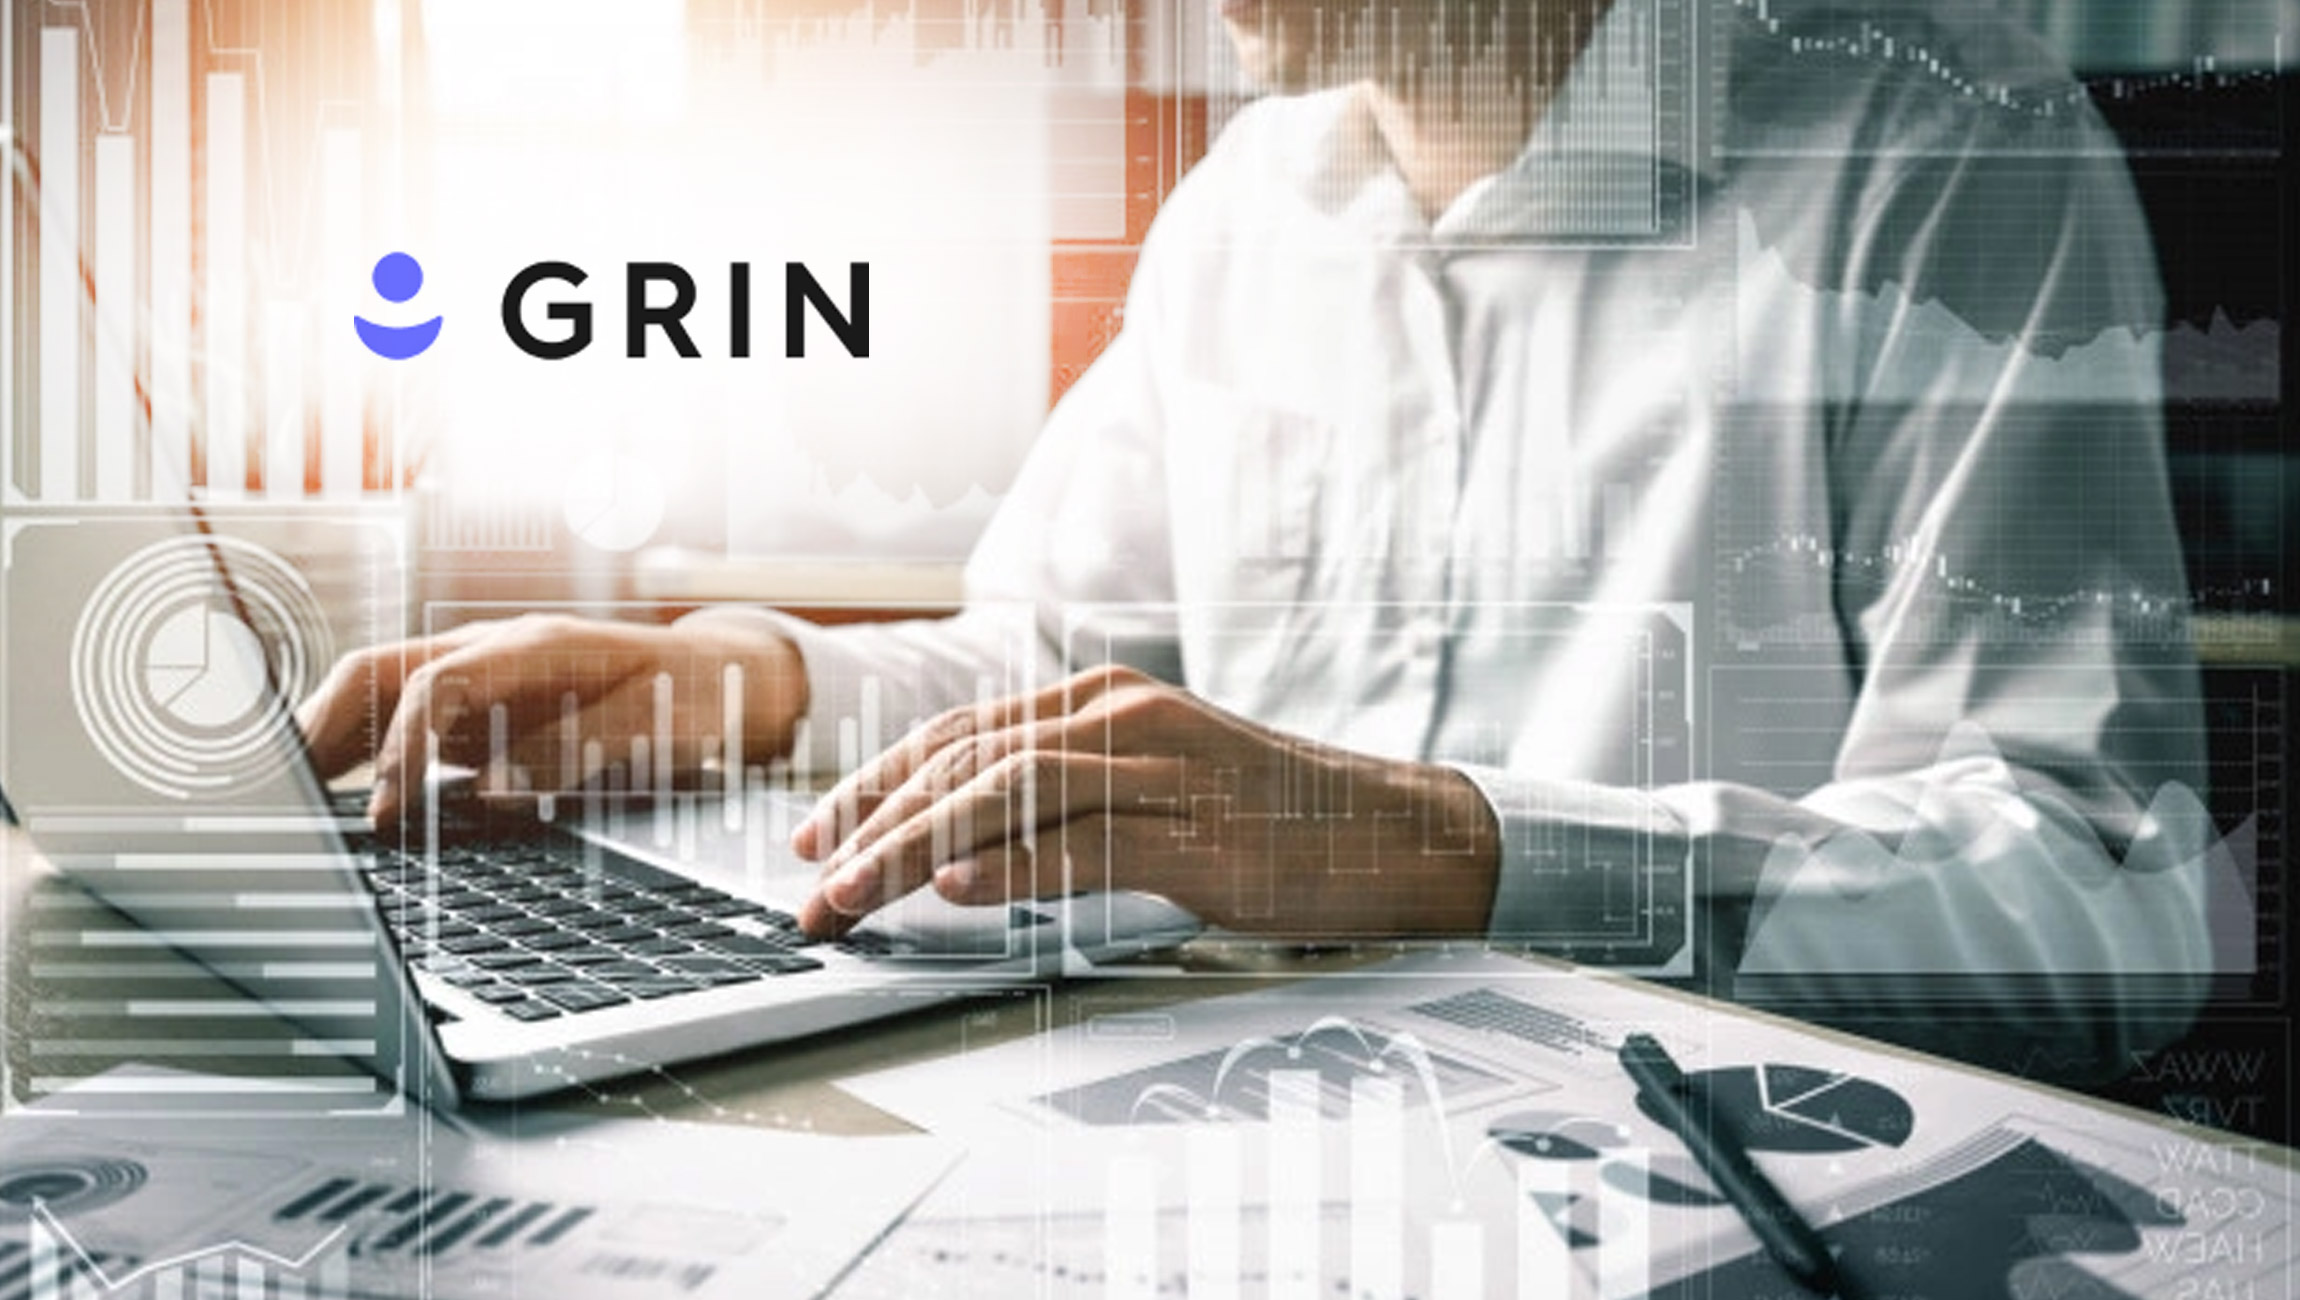 GRIN_-the-Worlds-Only-Creator-Management-Platform_-Closes-_110-Million-Series-B-Round-Led-by-Lone-Pine-Capital.jpg